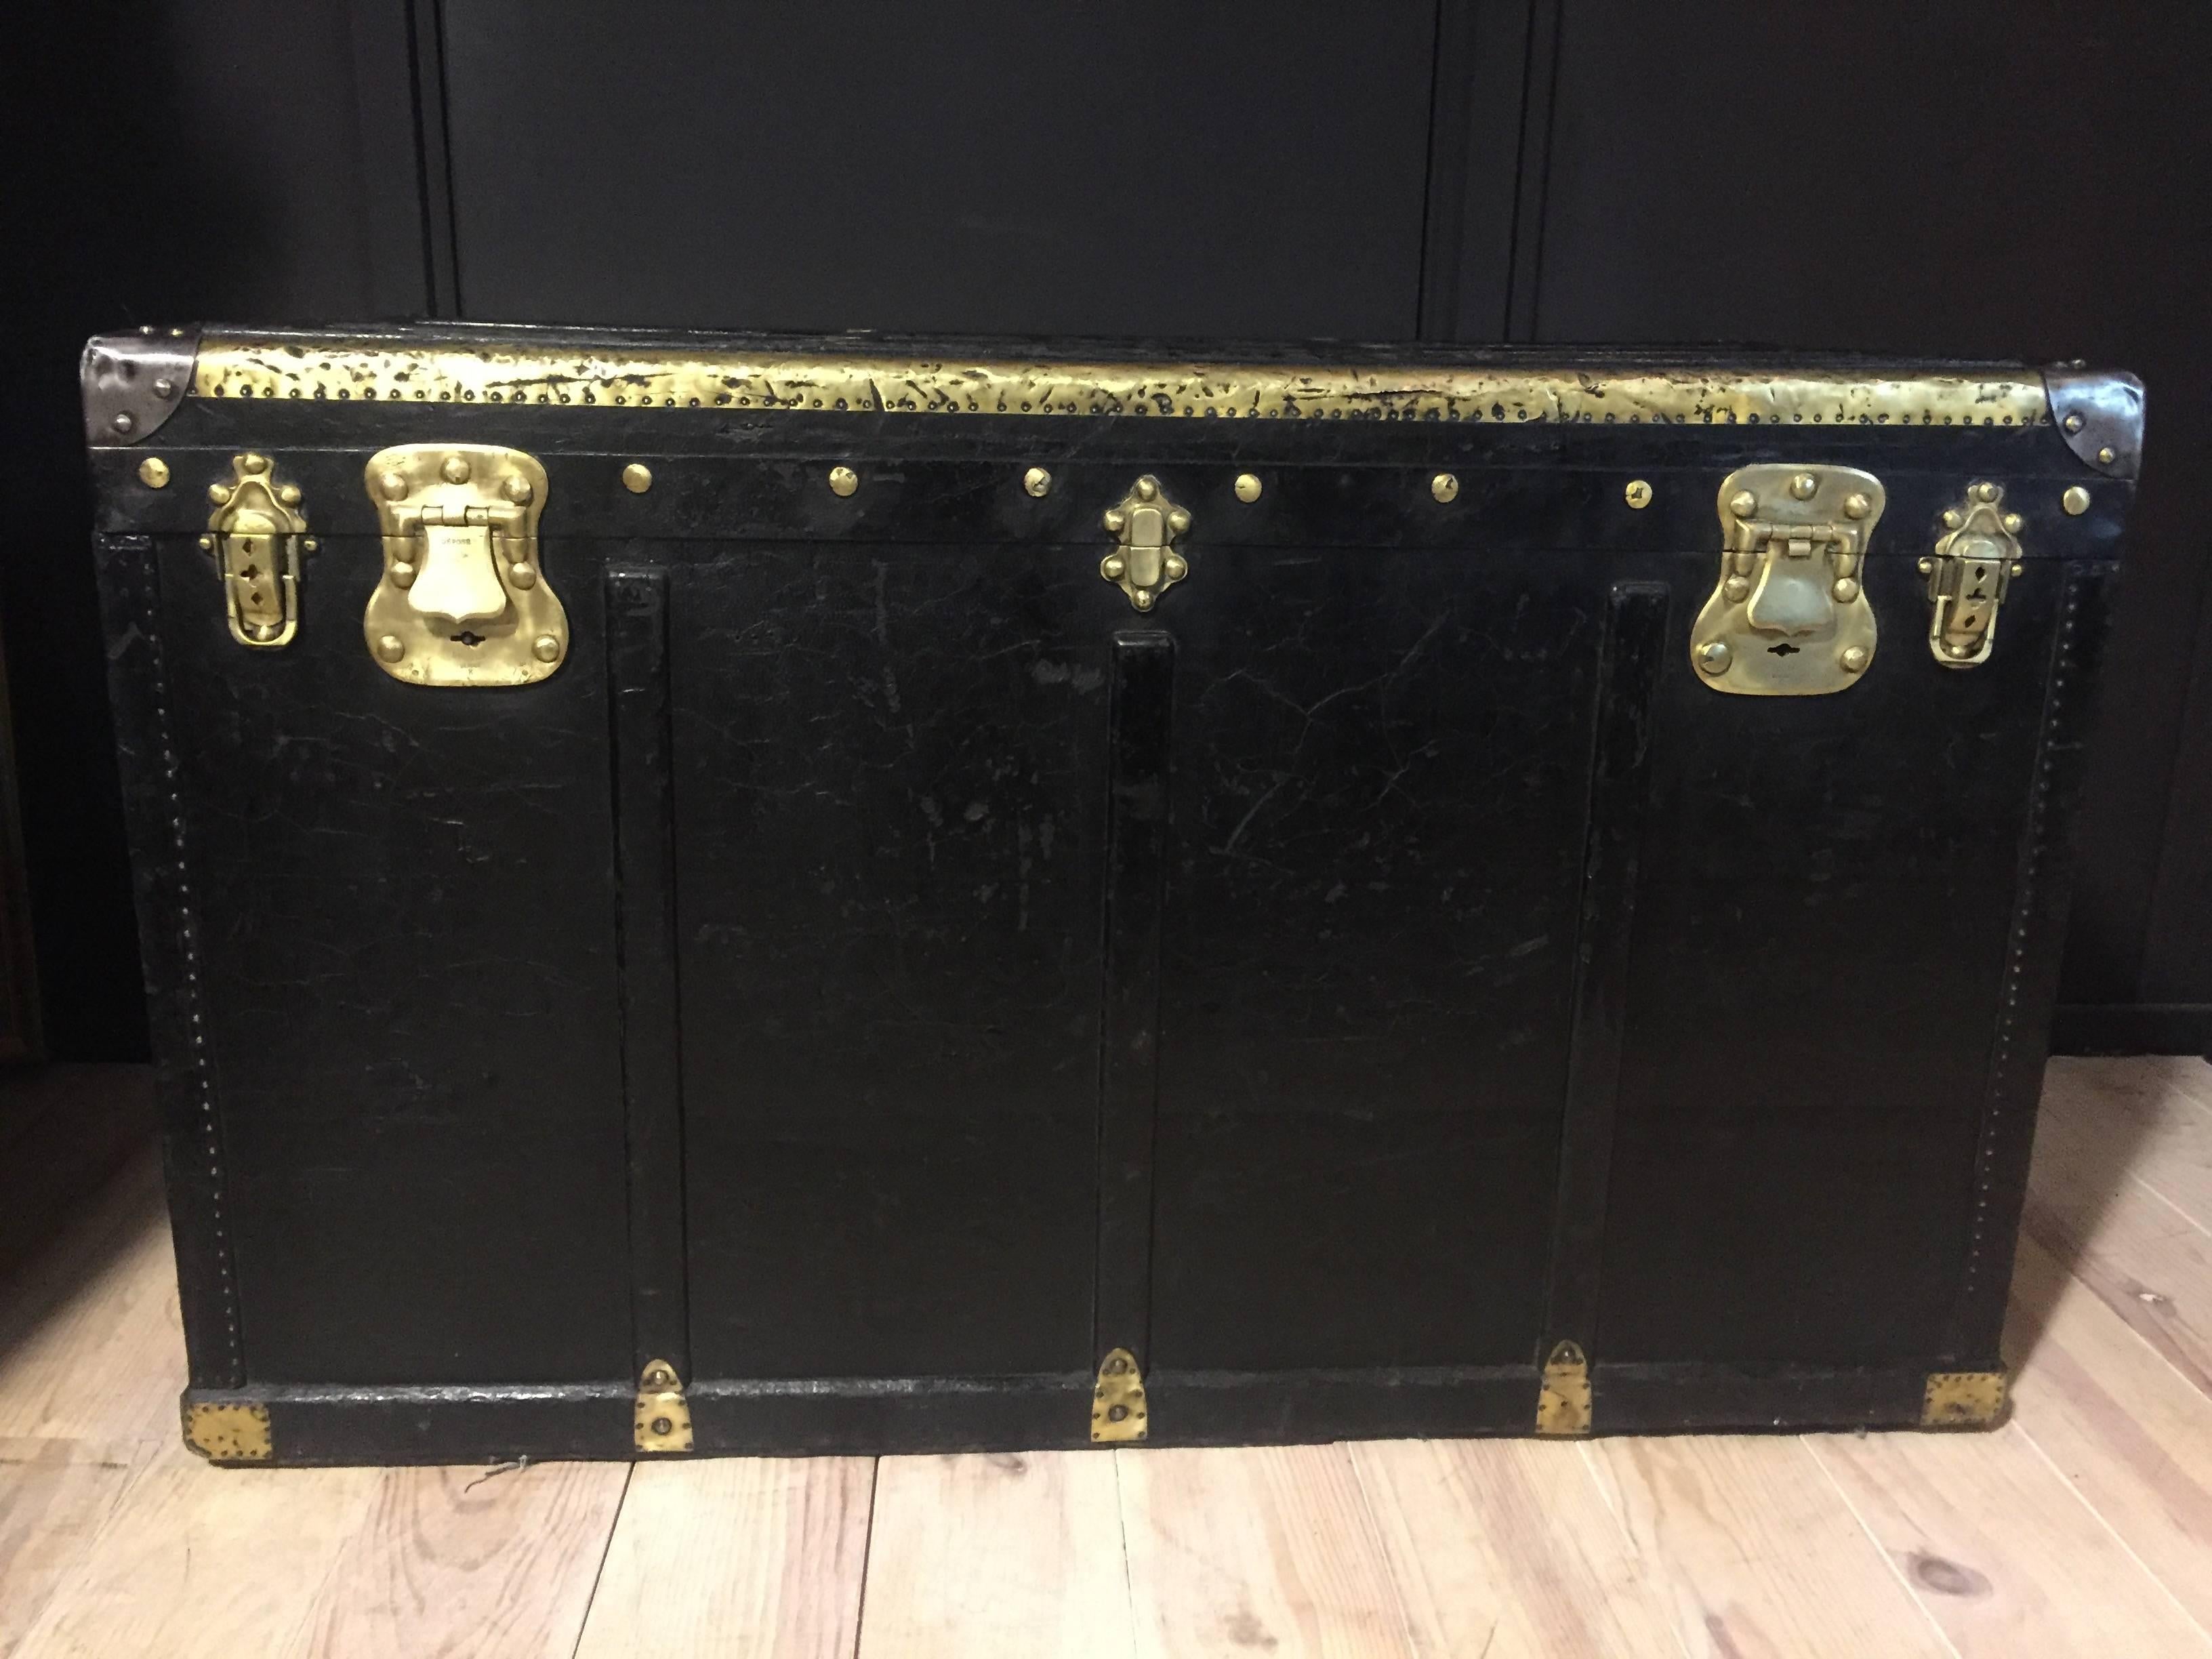 Vintage French steamer trunk. Black leather with brass corners and locks.
Very decorative piece can also be used as a coffee table.
           